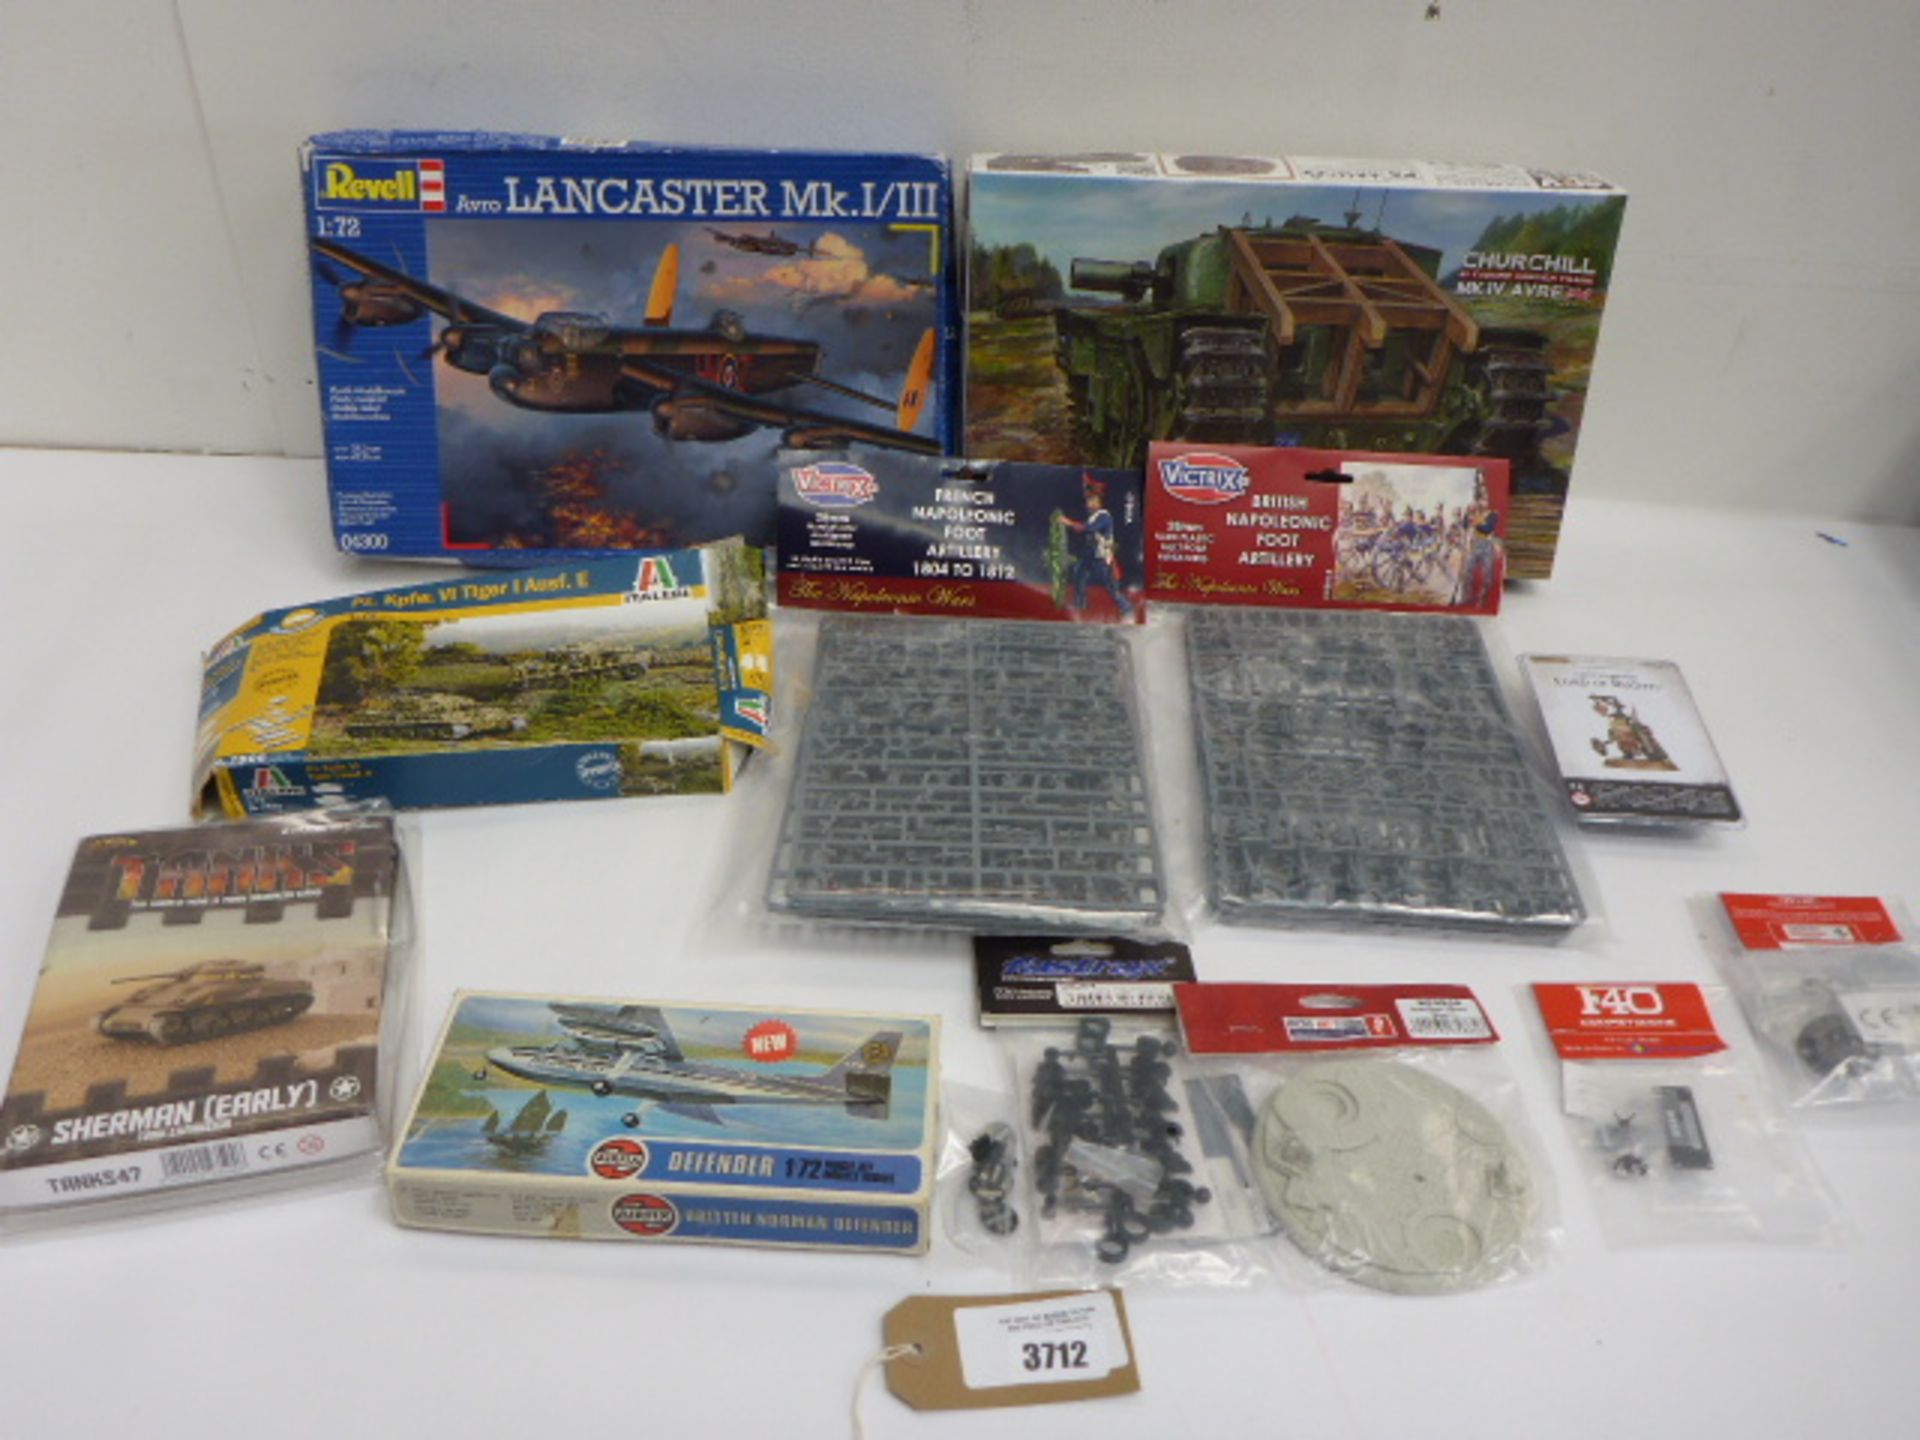 Revell, Airfix & other military model kits and model parts